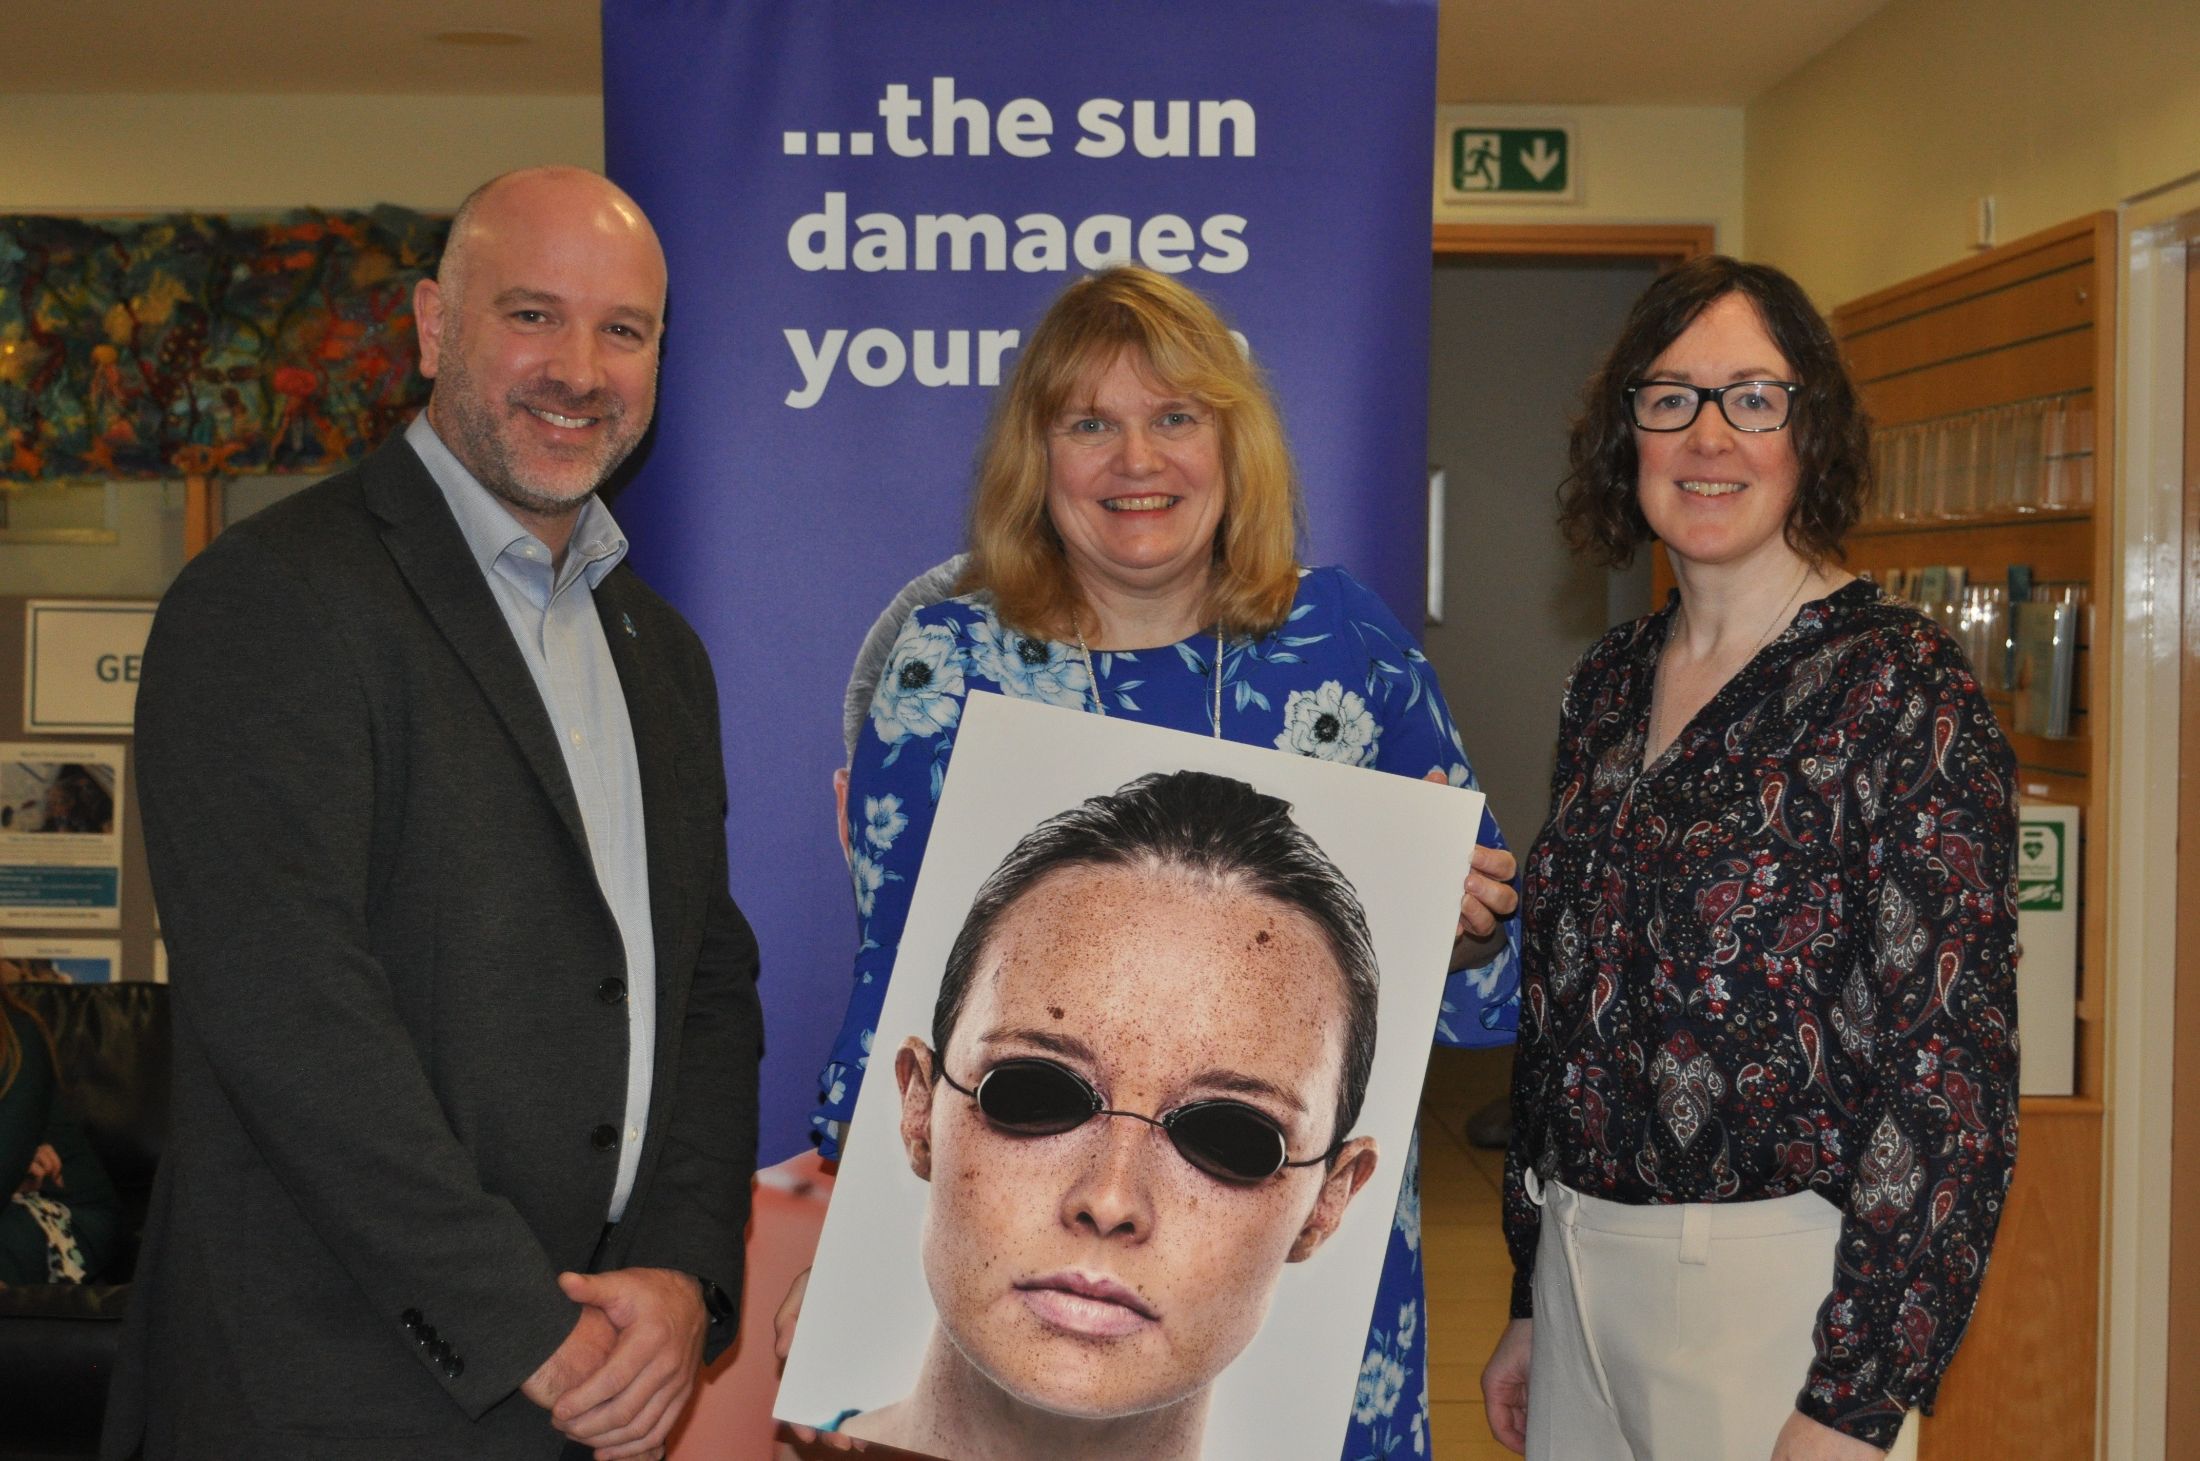 Cancer Focus NI Research reveals 17m annual cost of treating Skin Cancer